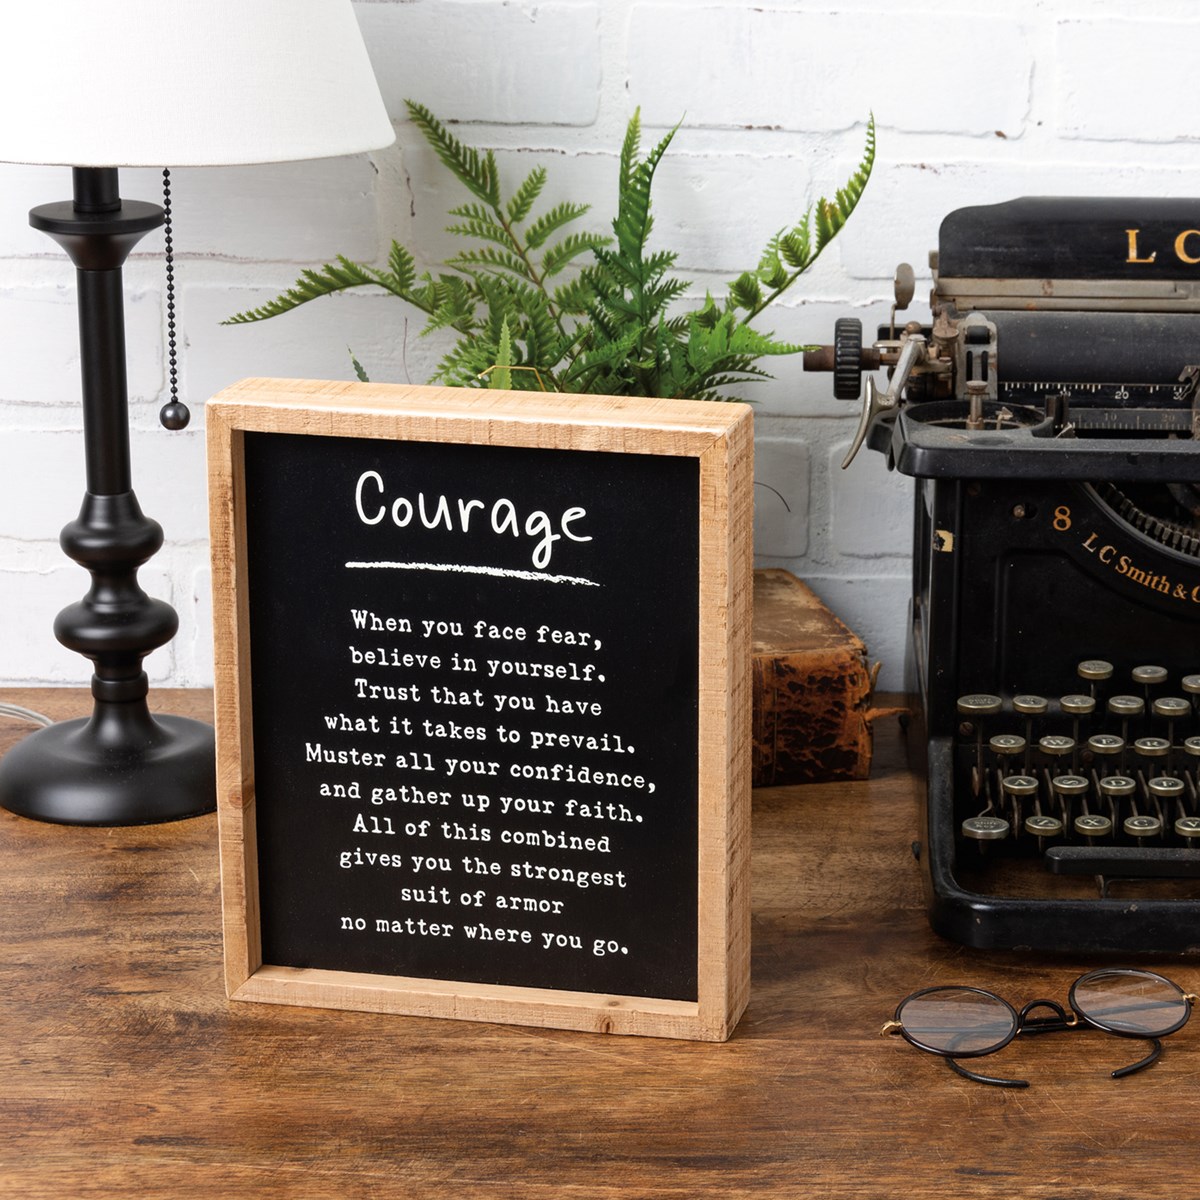 Courage Inset Box Sign - Wood